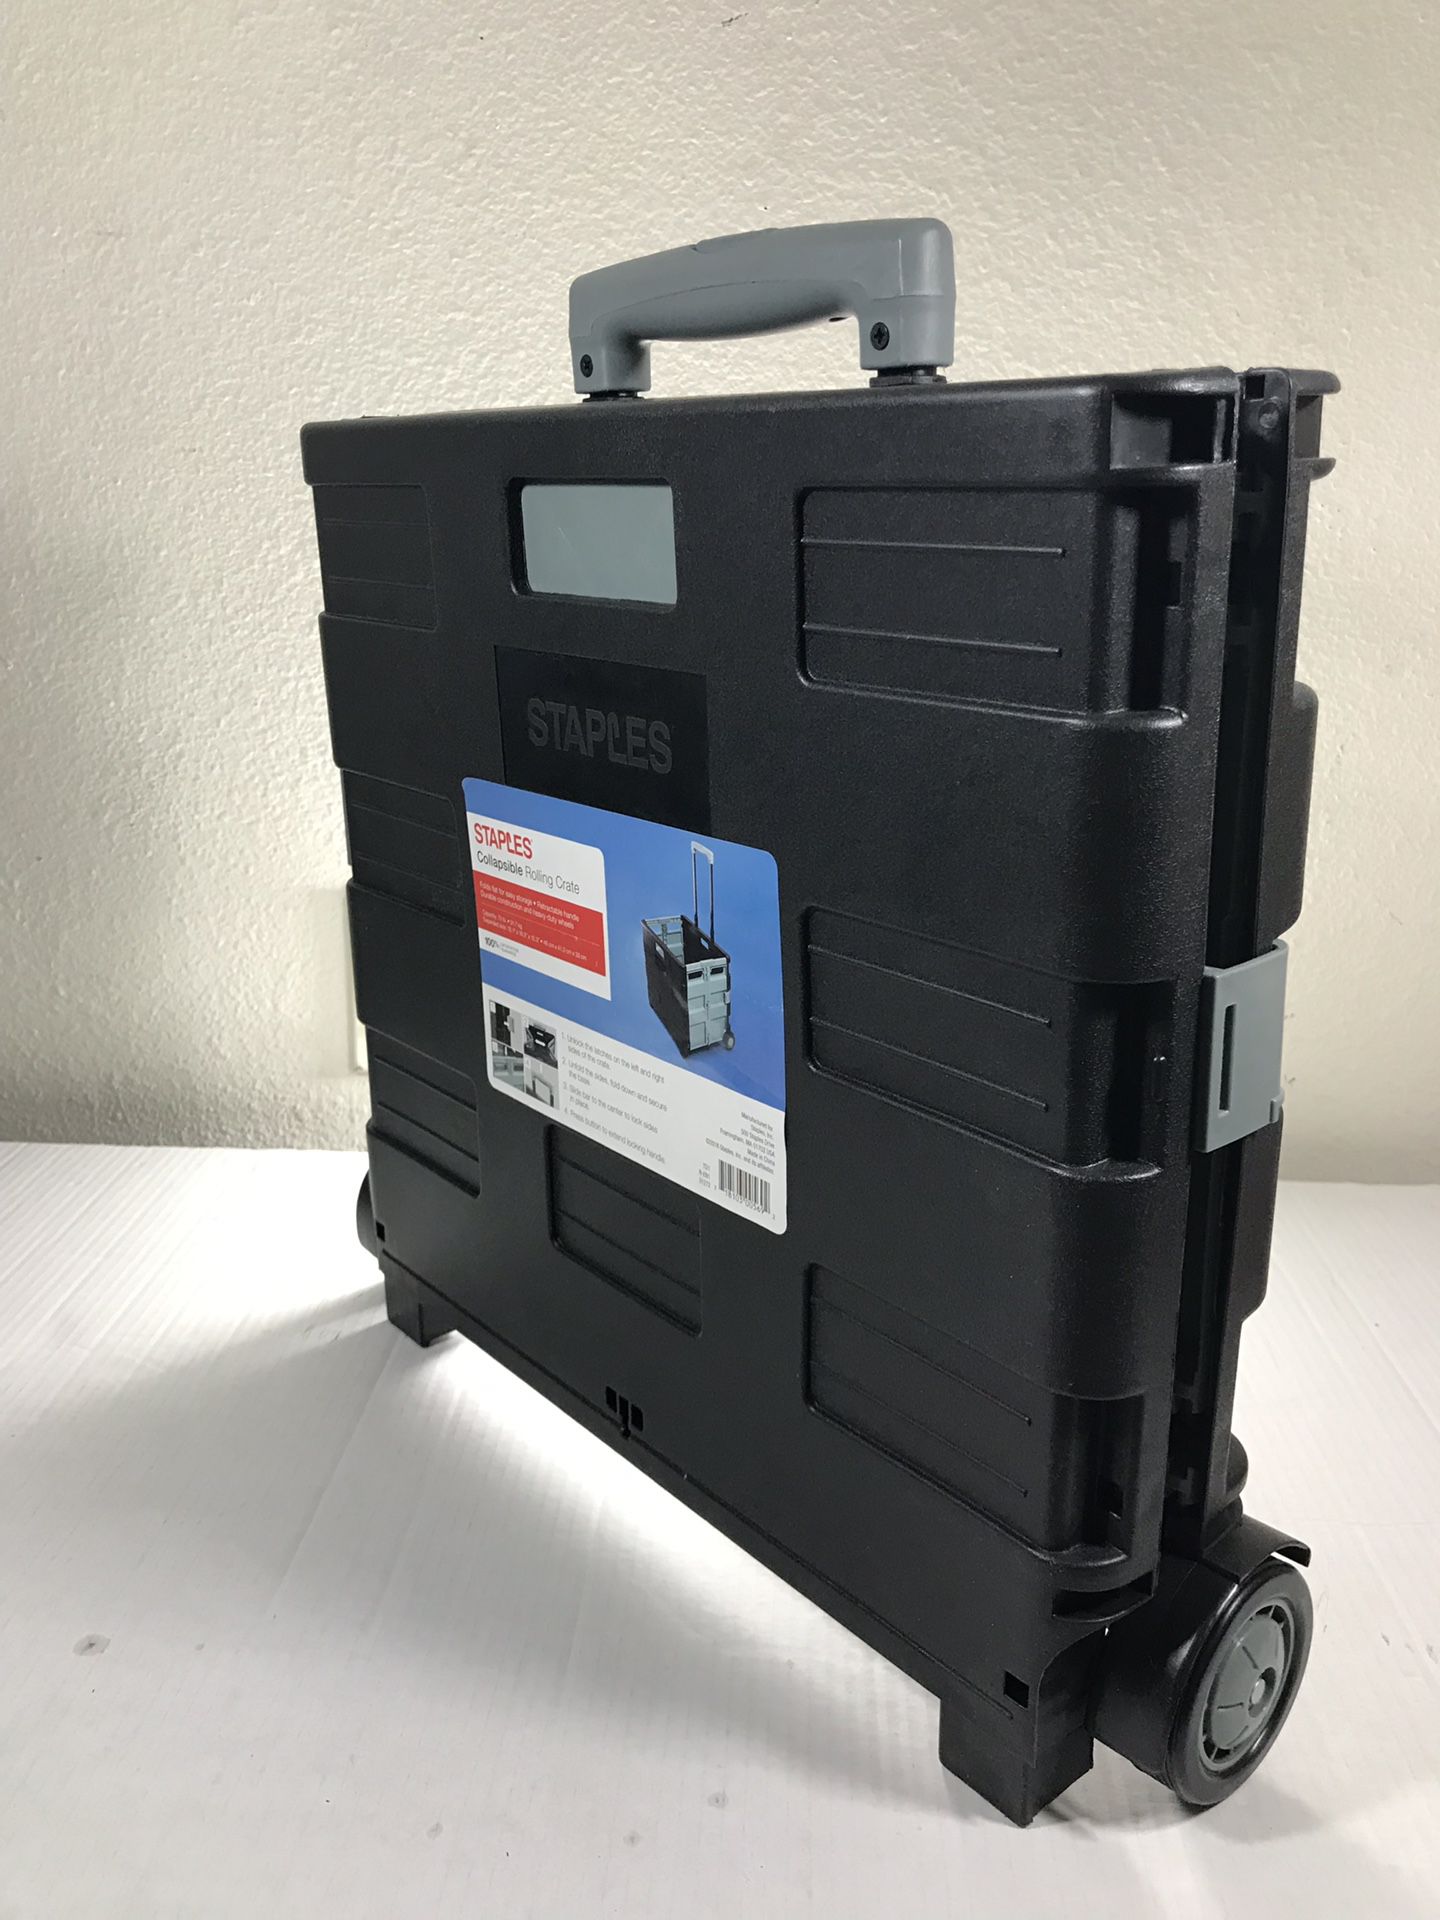 Collapsible rolling crate (Firm price $25)